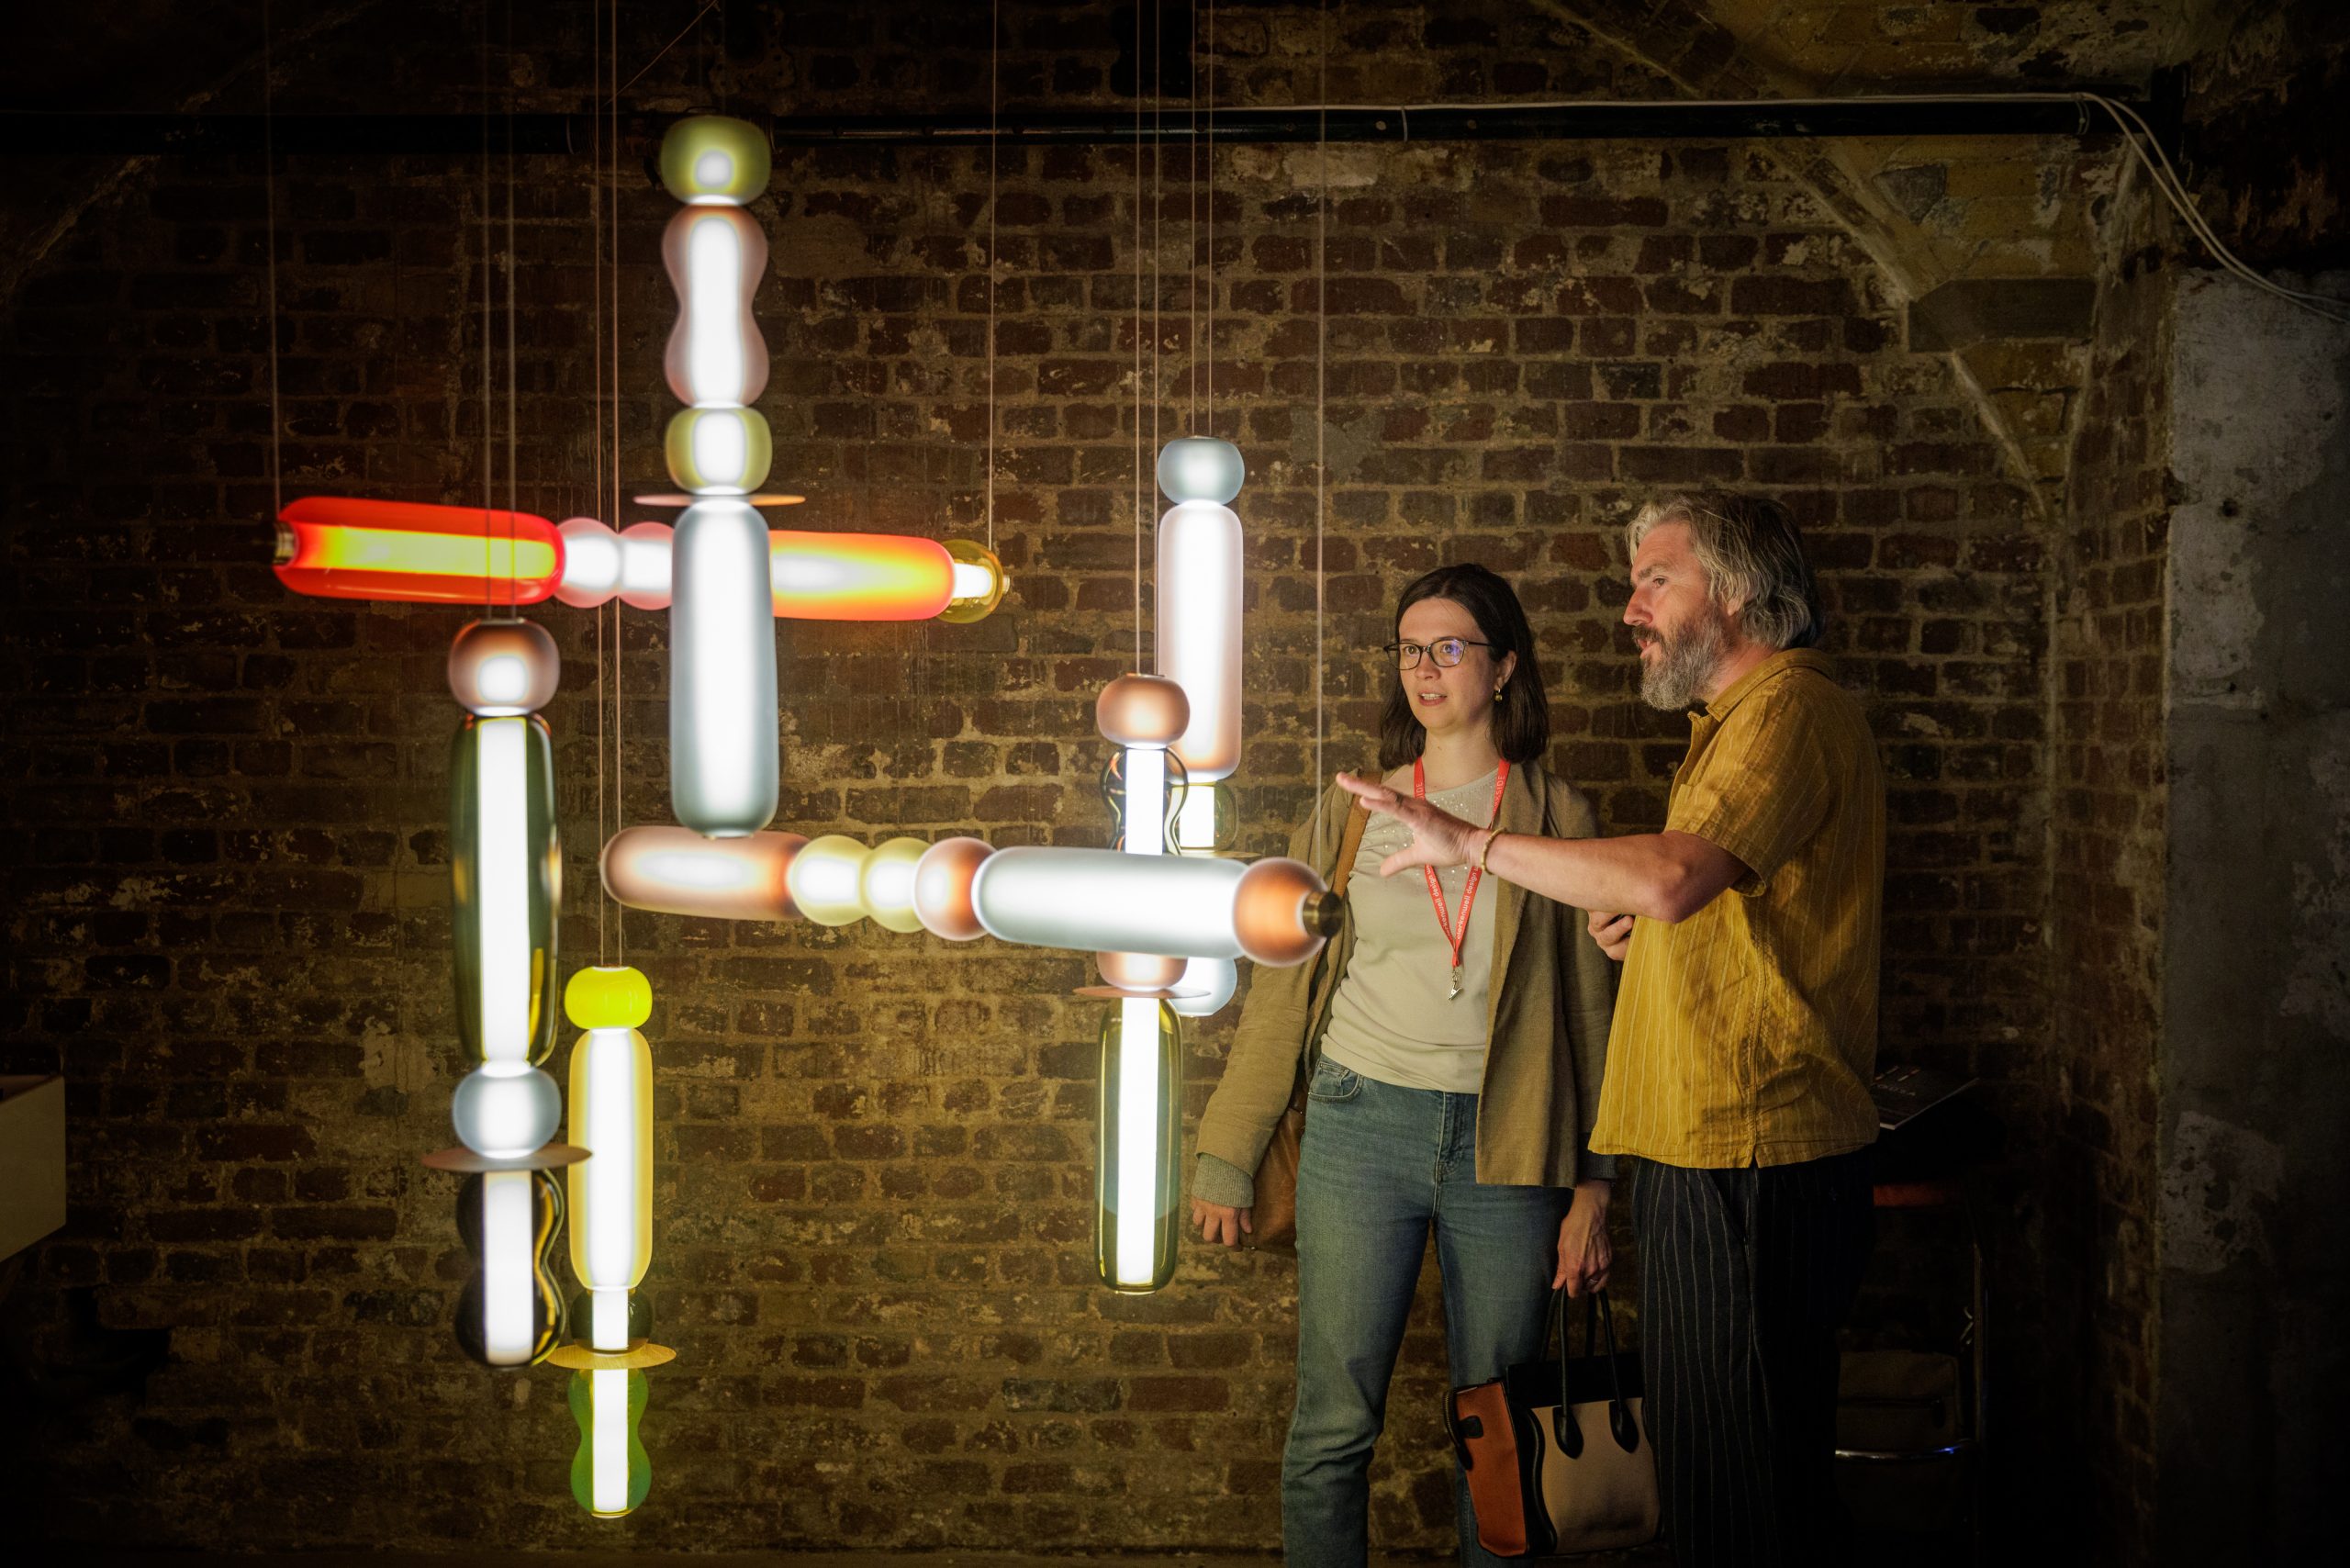 Clerkenwell Design Week, one of the biggest design events in London